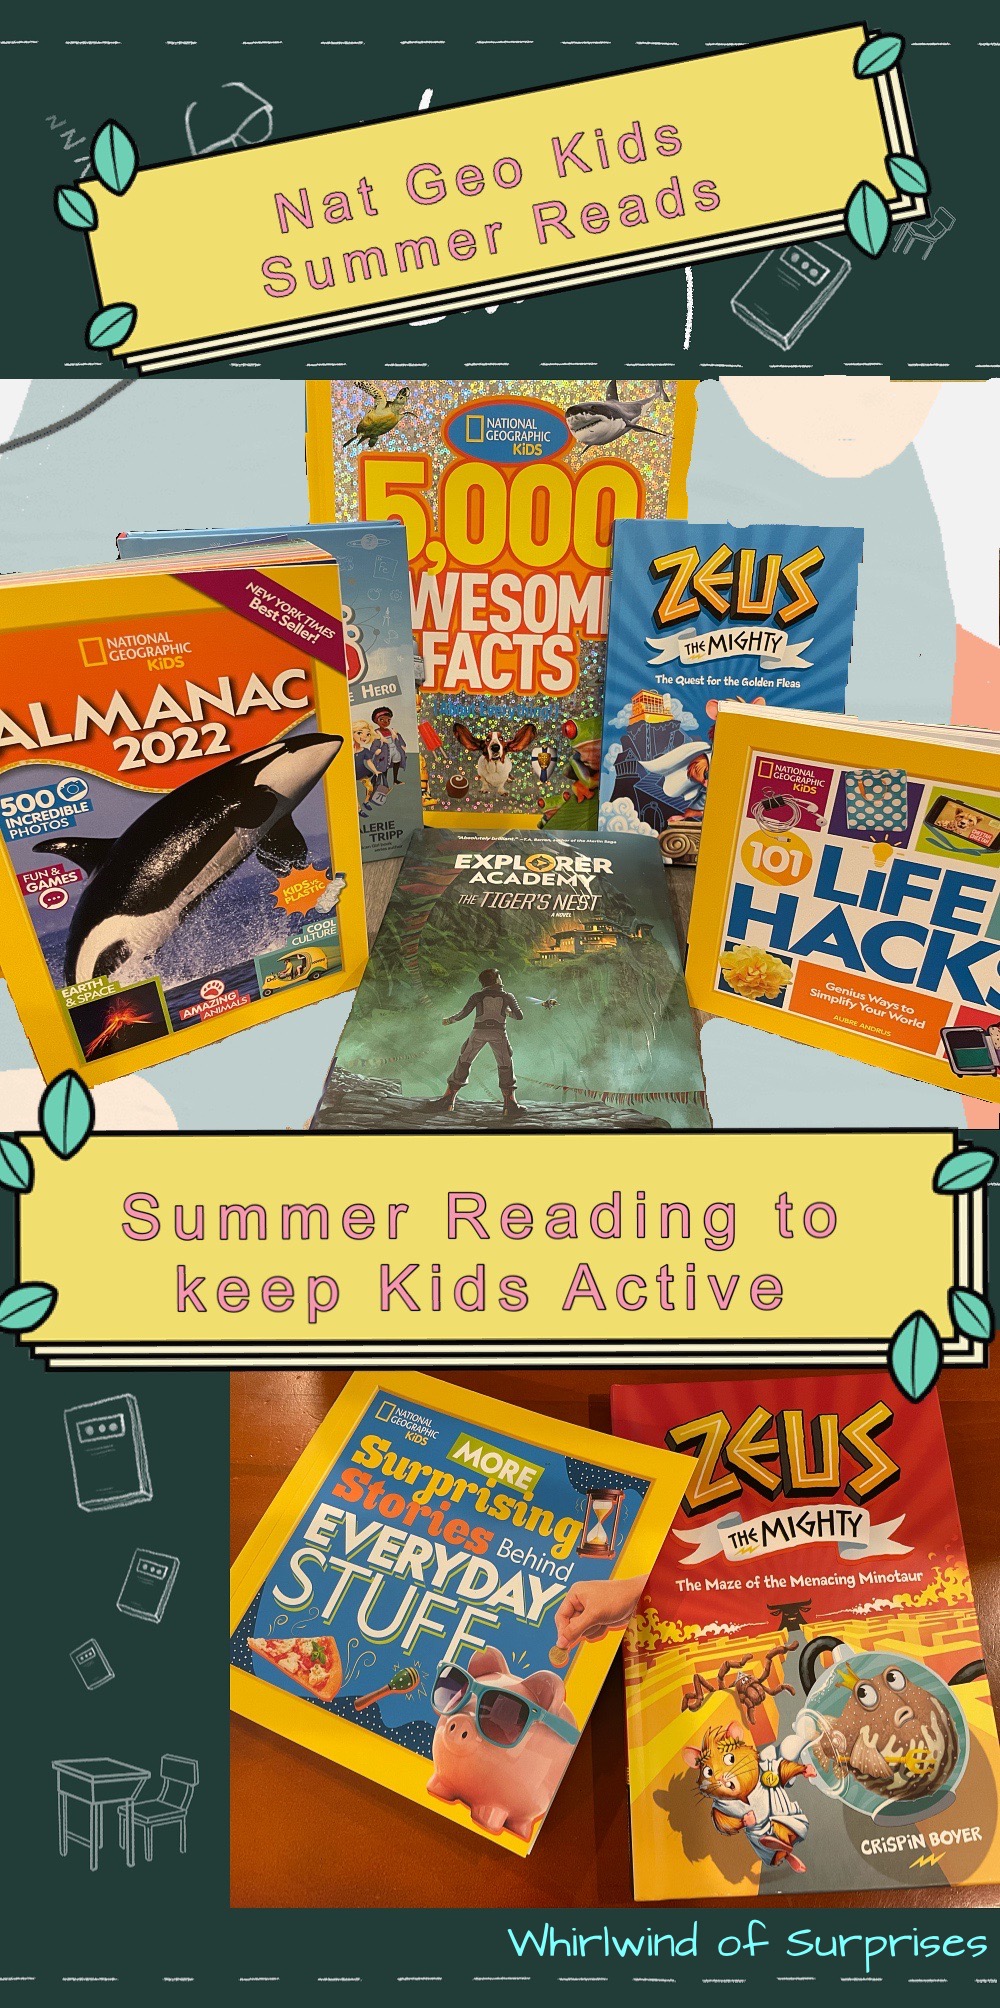 Summer Reading fun to keep Kids Minds Active and Smart!